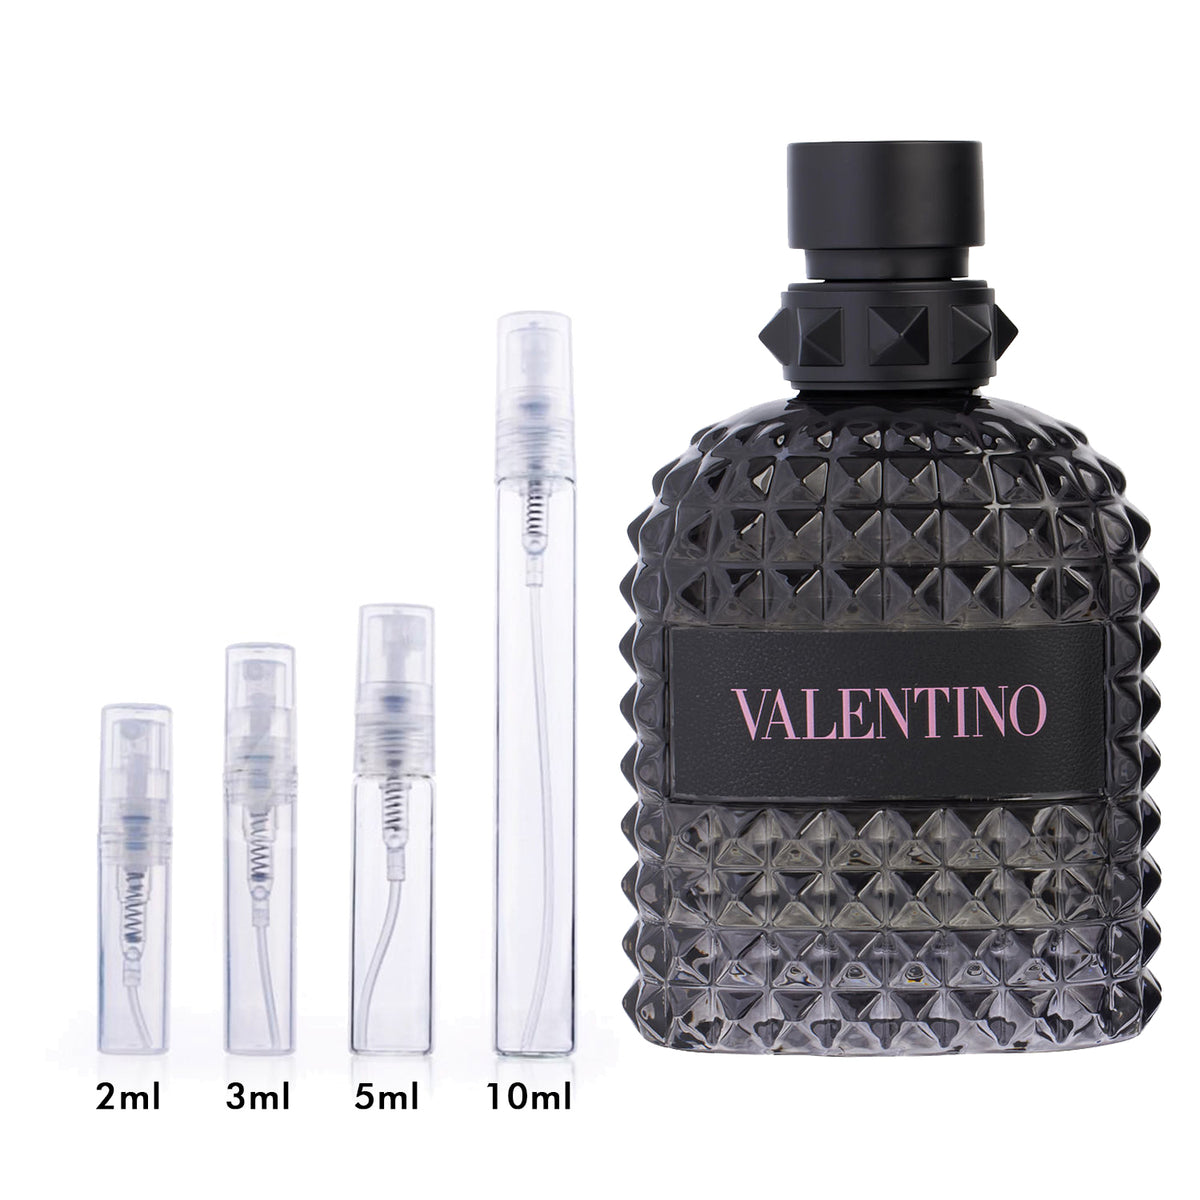 Uomo Born In Roma by Valentino Fragrance Samples | DecantX | Eau de Toilette  Scent Sampler and Travel Size Perfume Atomizer